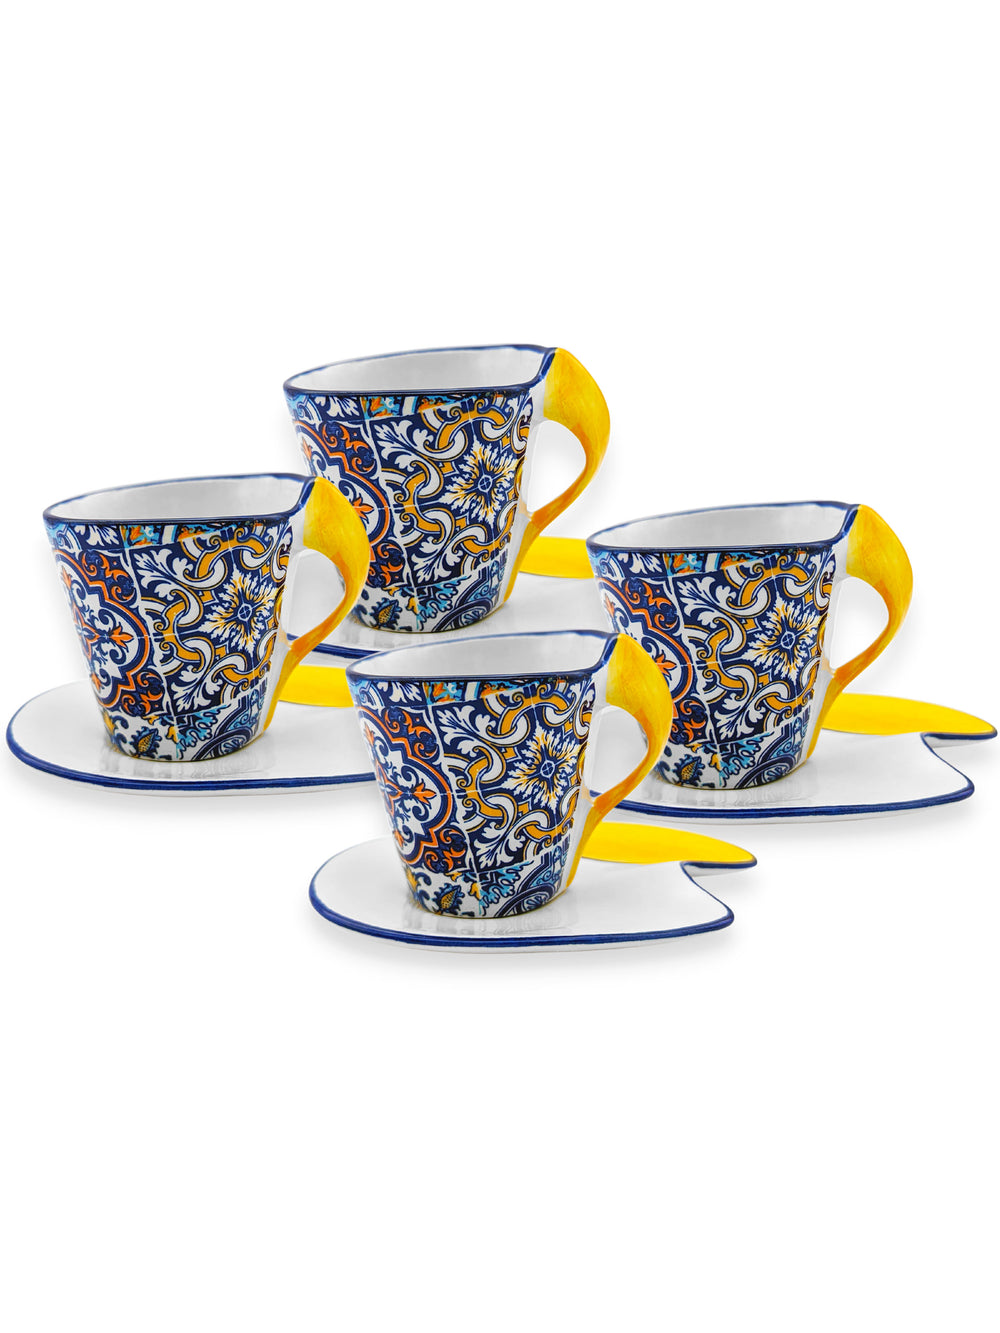 https://cdn.shopify.com/s/files/1/0569/9194/0784/products/Portuguese-Pottery-Alcobaca-Ceramic-Hand-Painted-Coffee-Espresso-Cup-Set-of-4_1.jpg?v=1672461767&width=1000